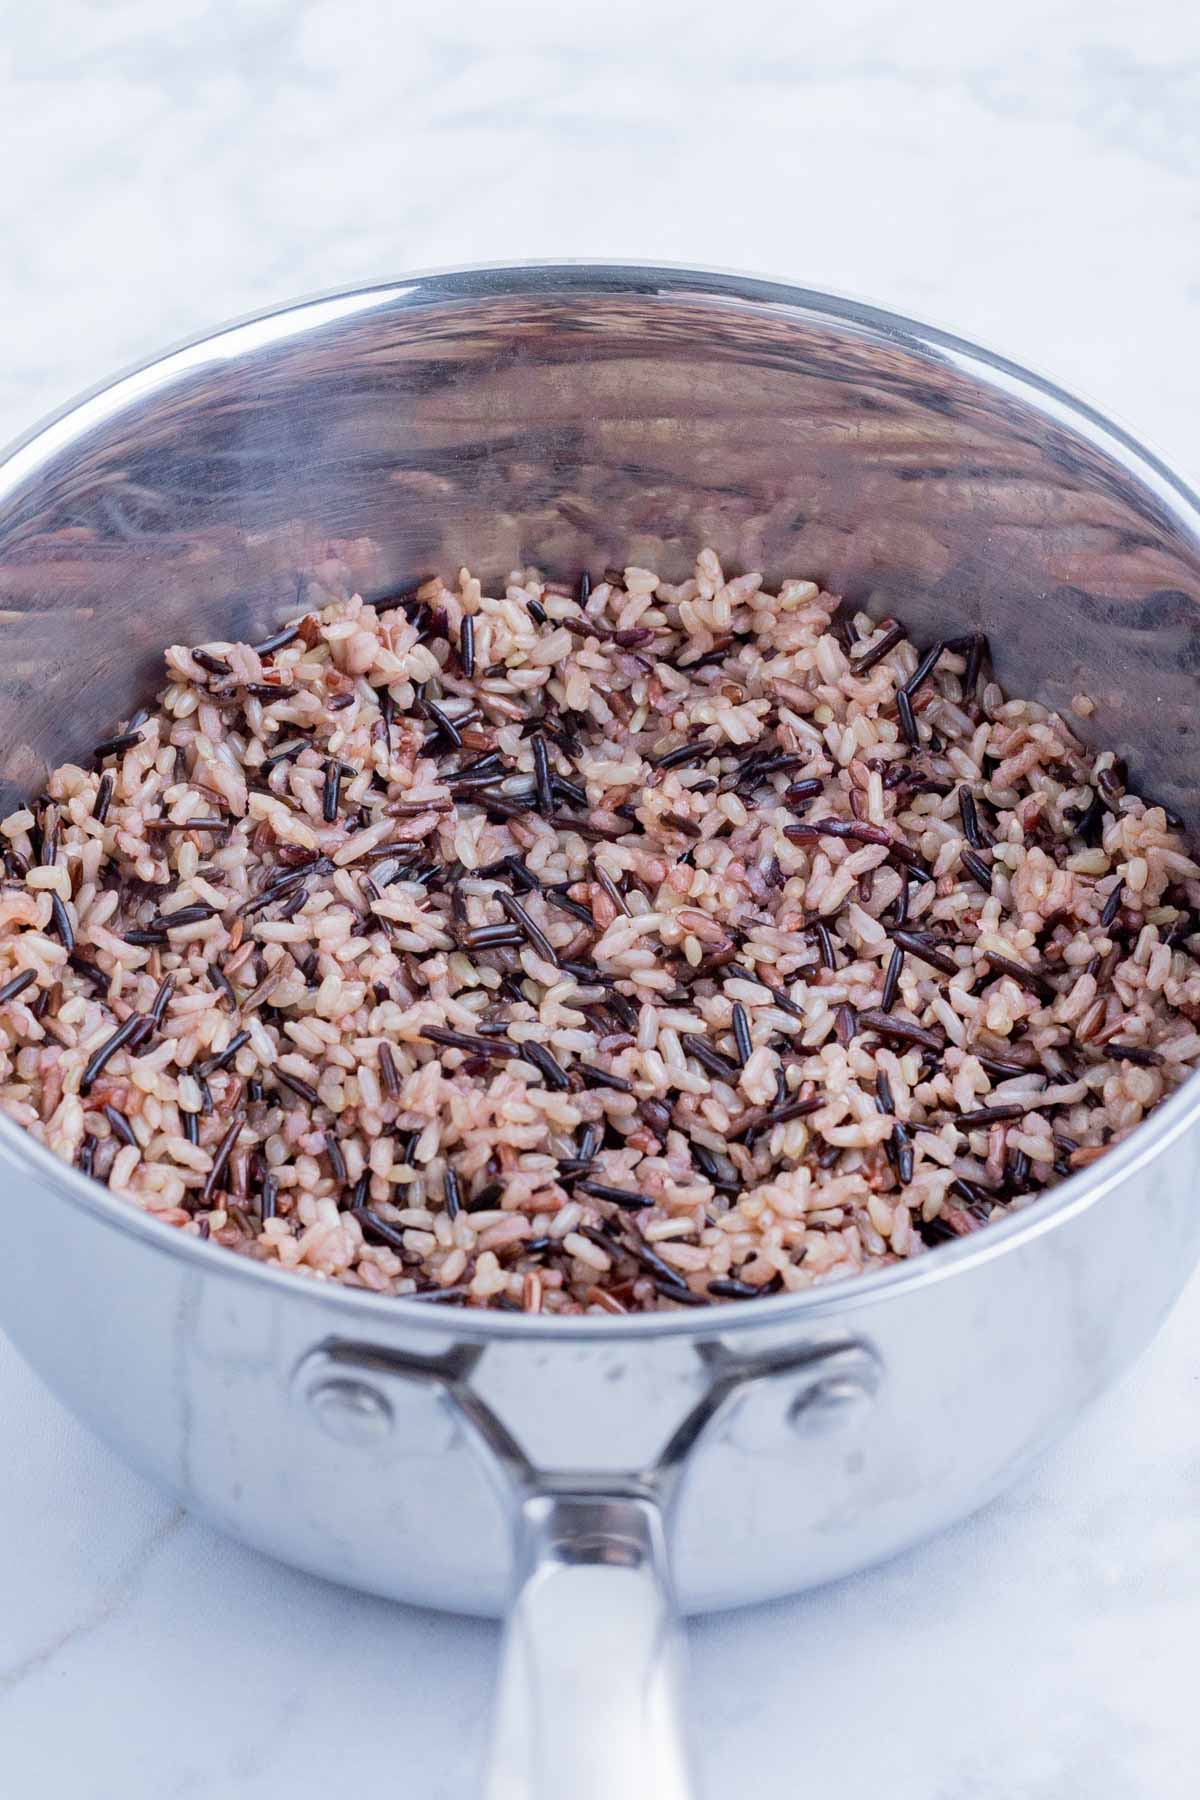 The wild rice is cooked completely on the stove.